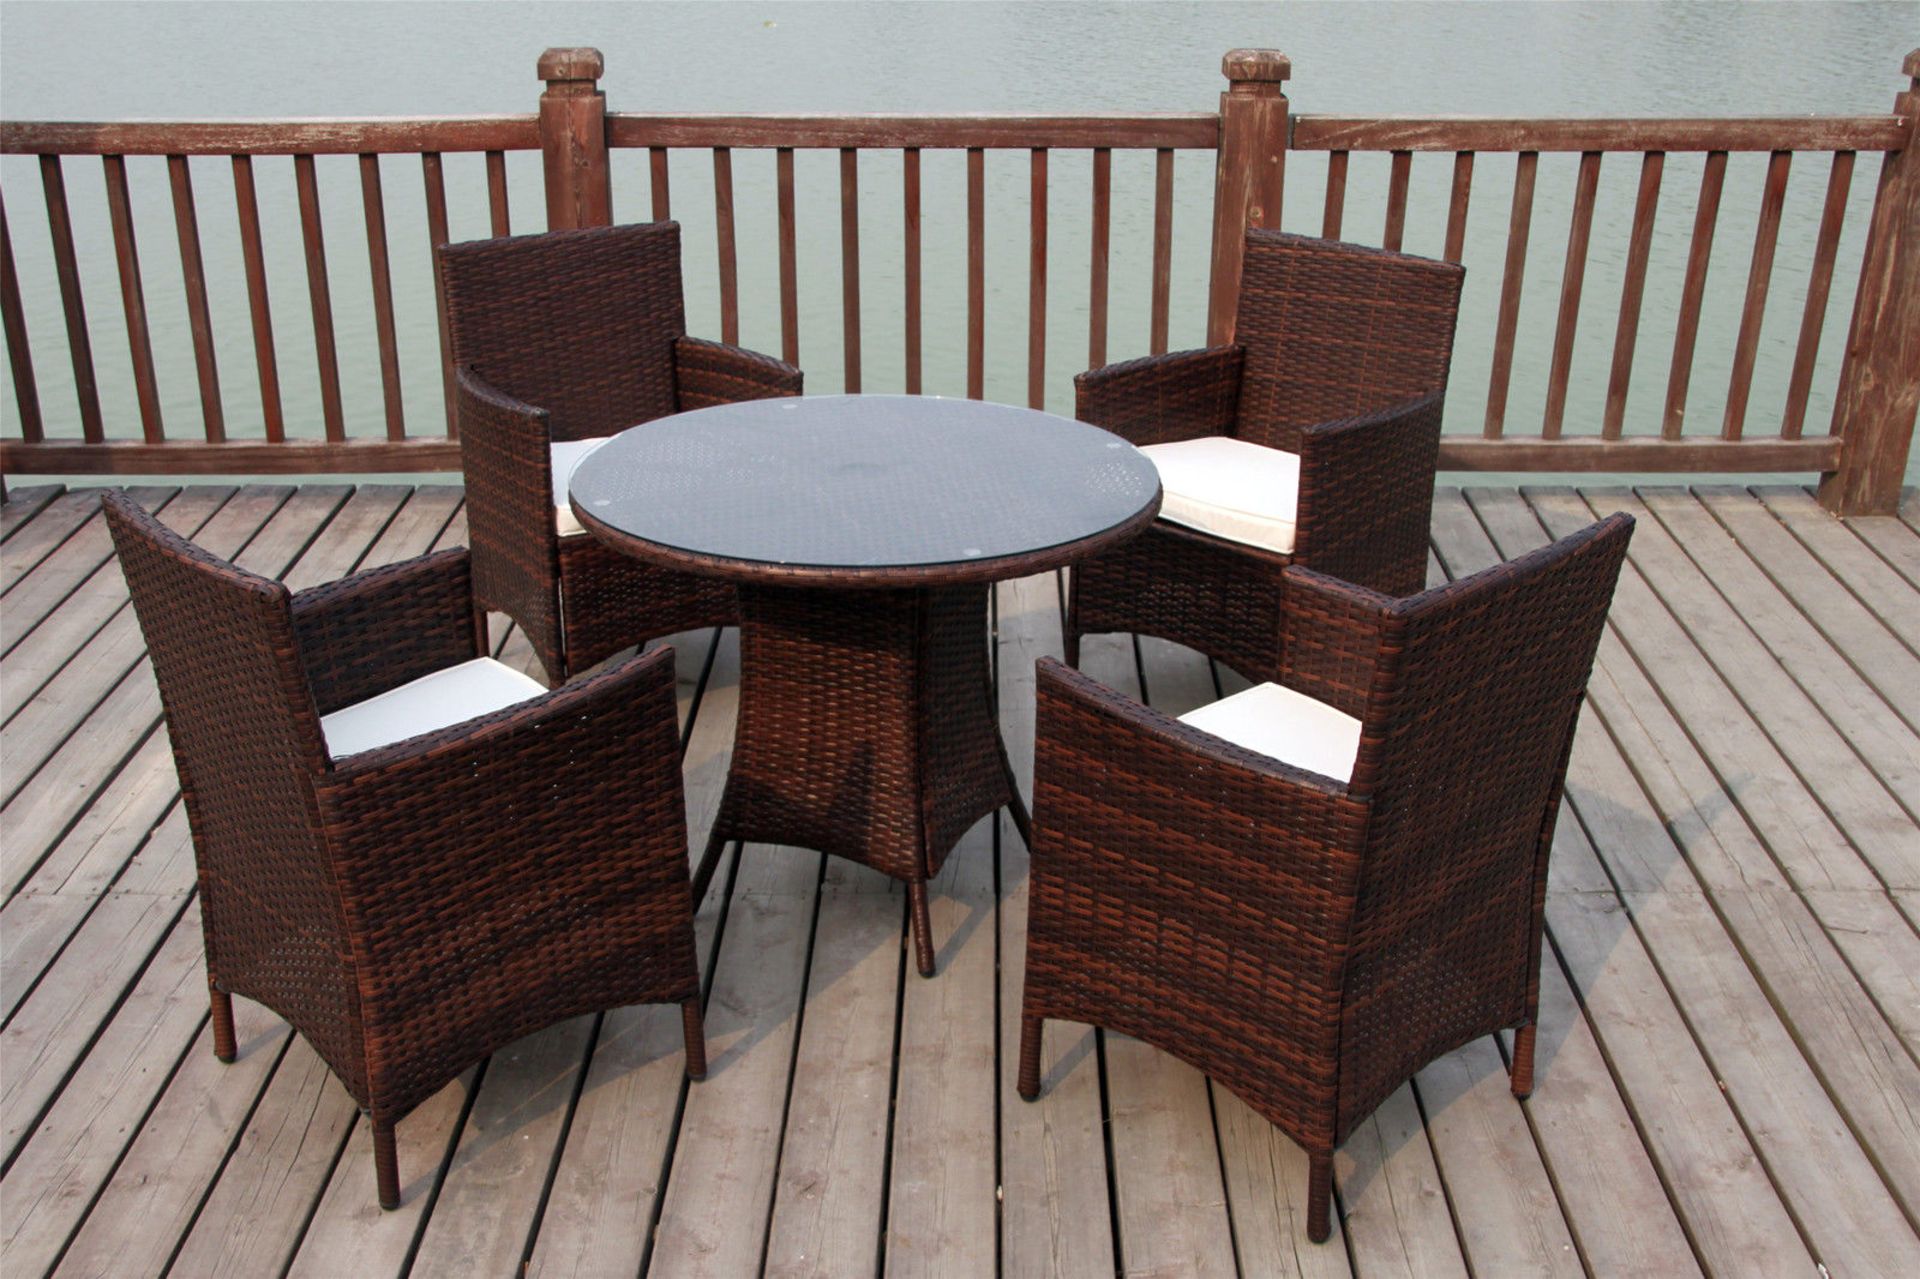 + VAT Brand New Chelsea Garden Company 4-Seater Brown Rattan Outdoor Dining Set - Item Is Available